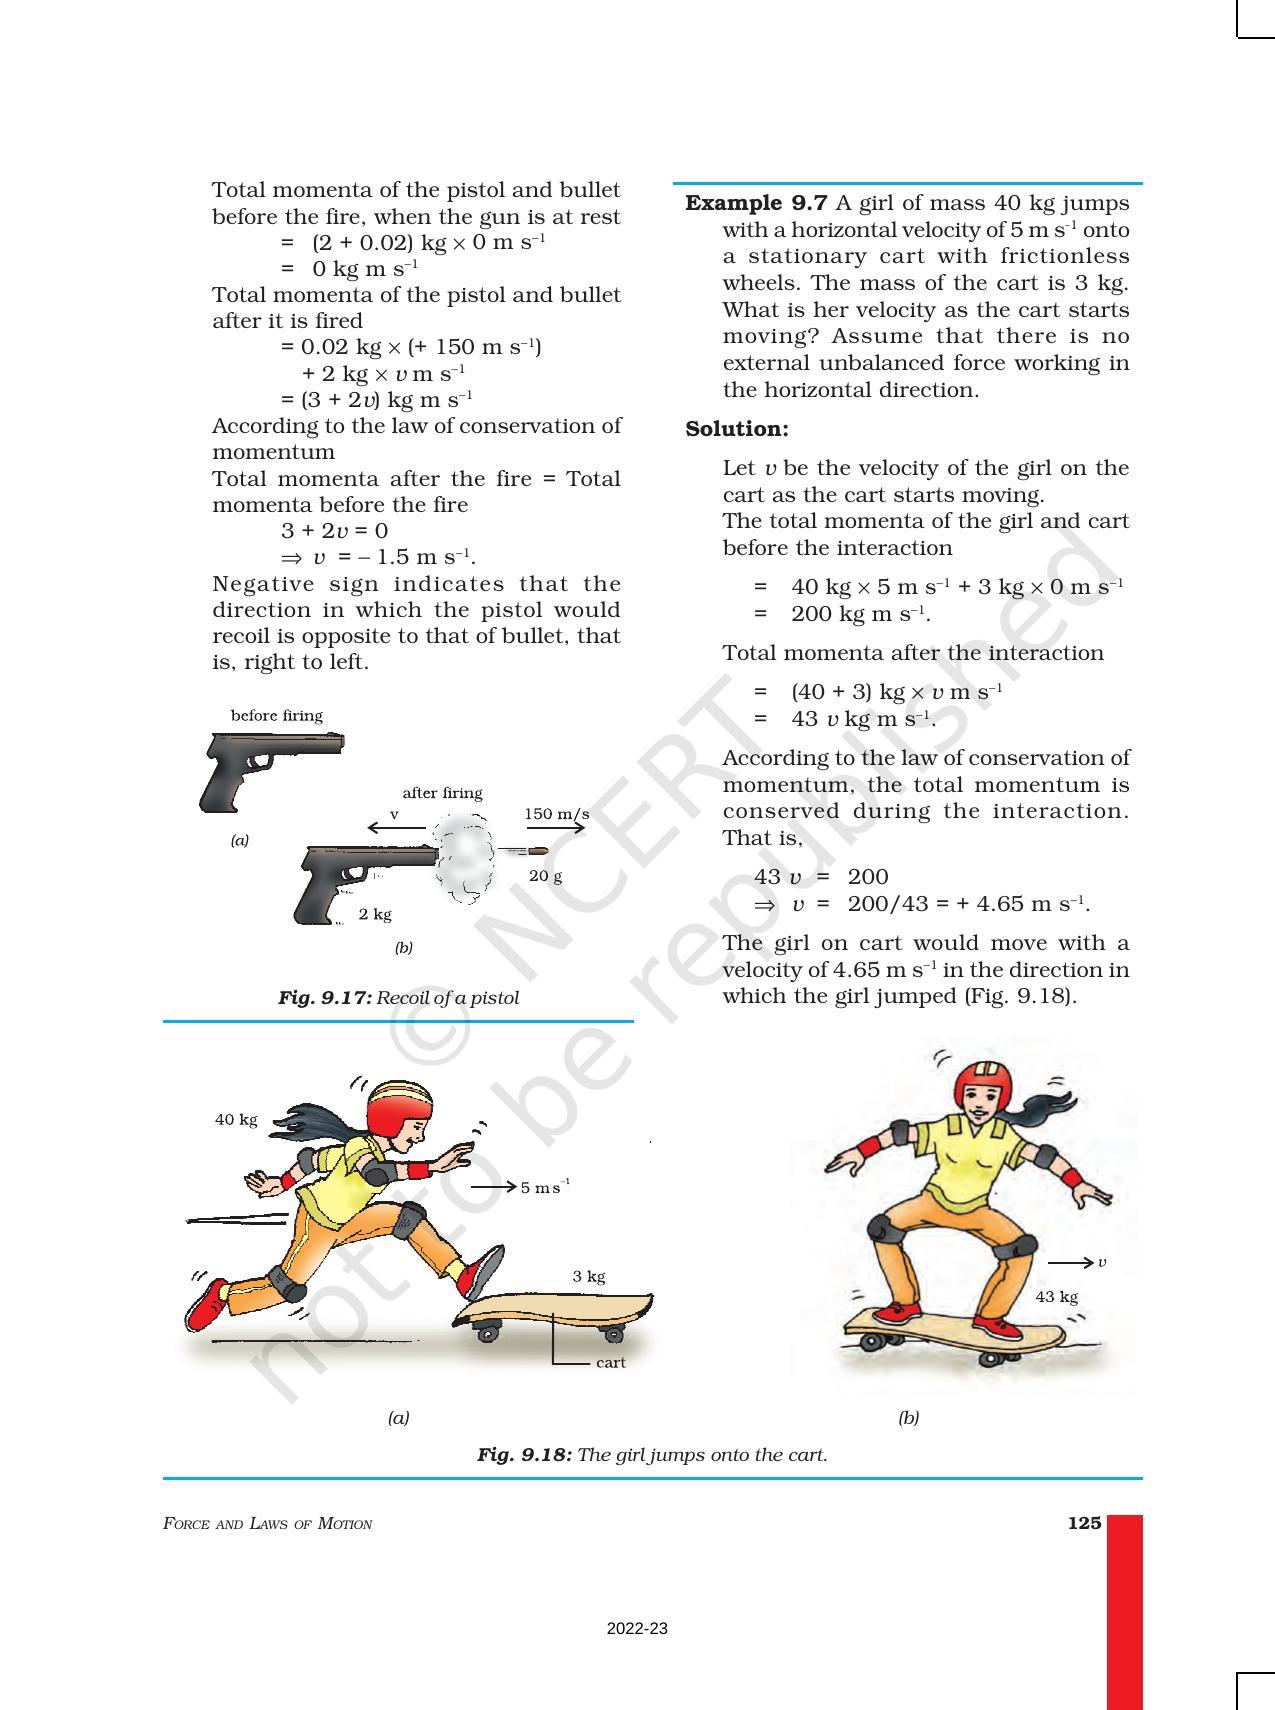 NCERT Book for Class 9 Science Chapter 9 Force And Laws Of Motion - Page 12